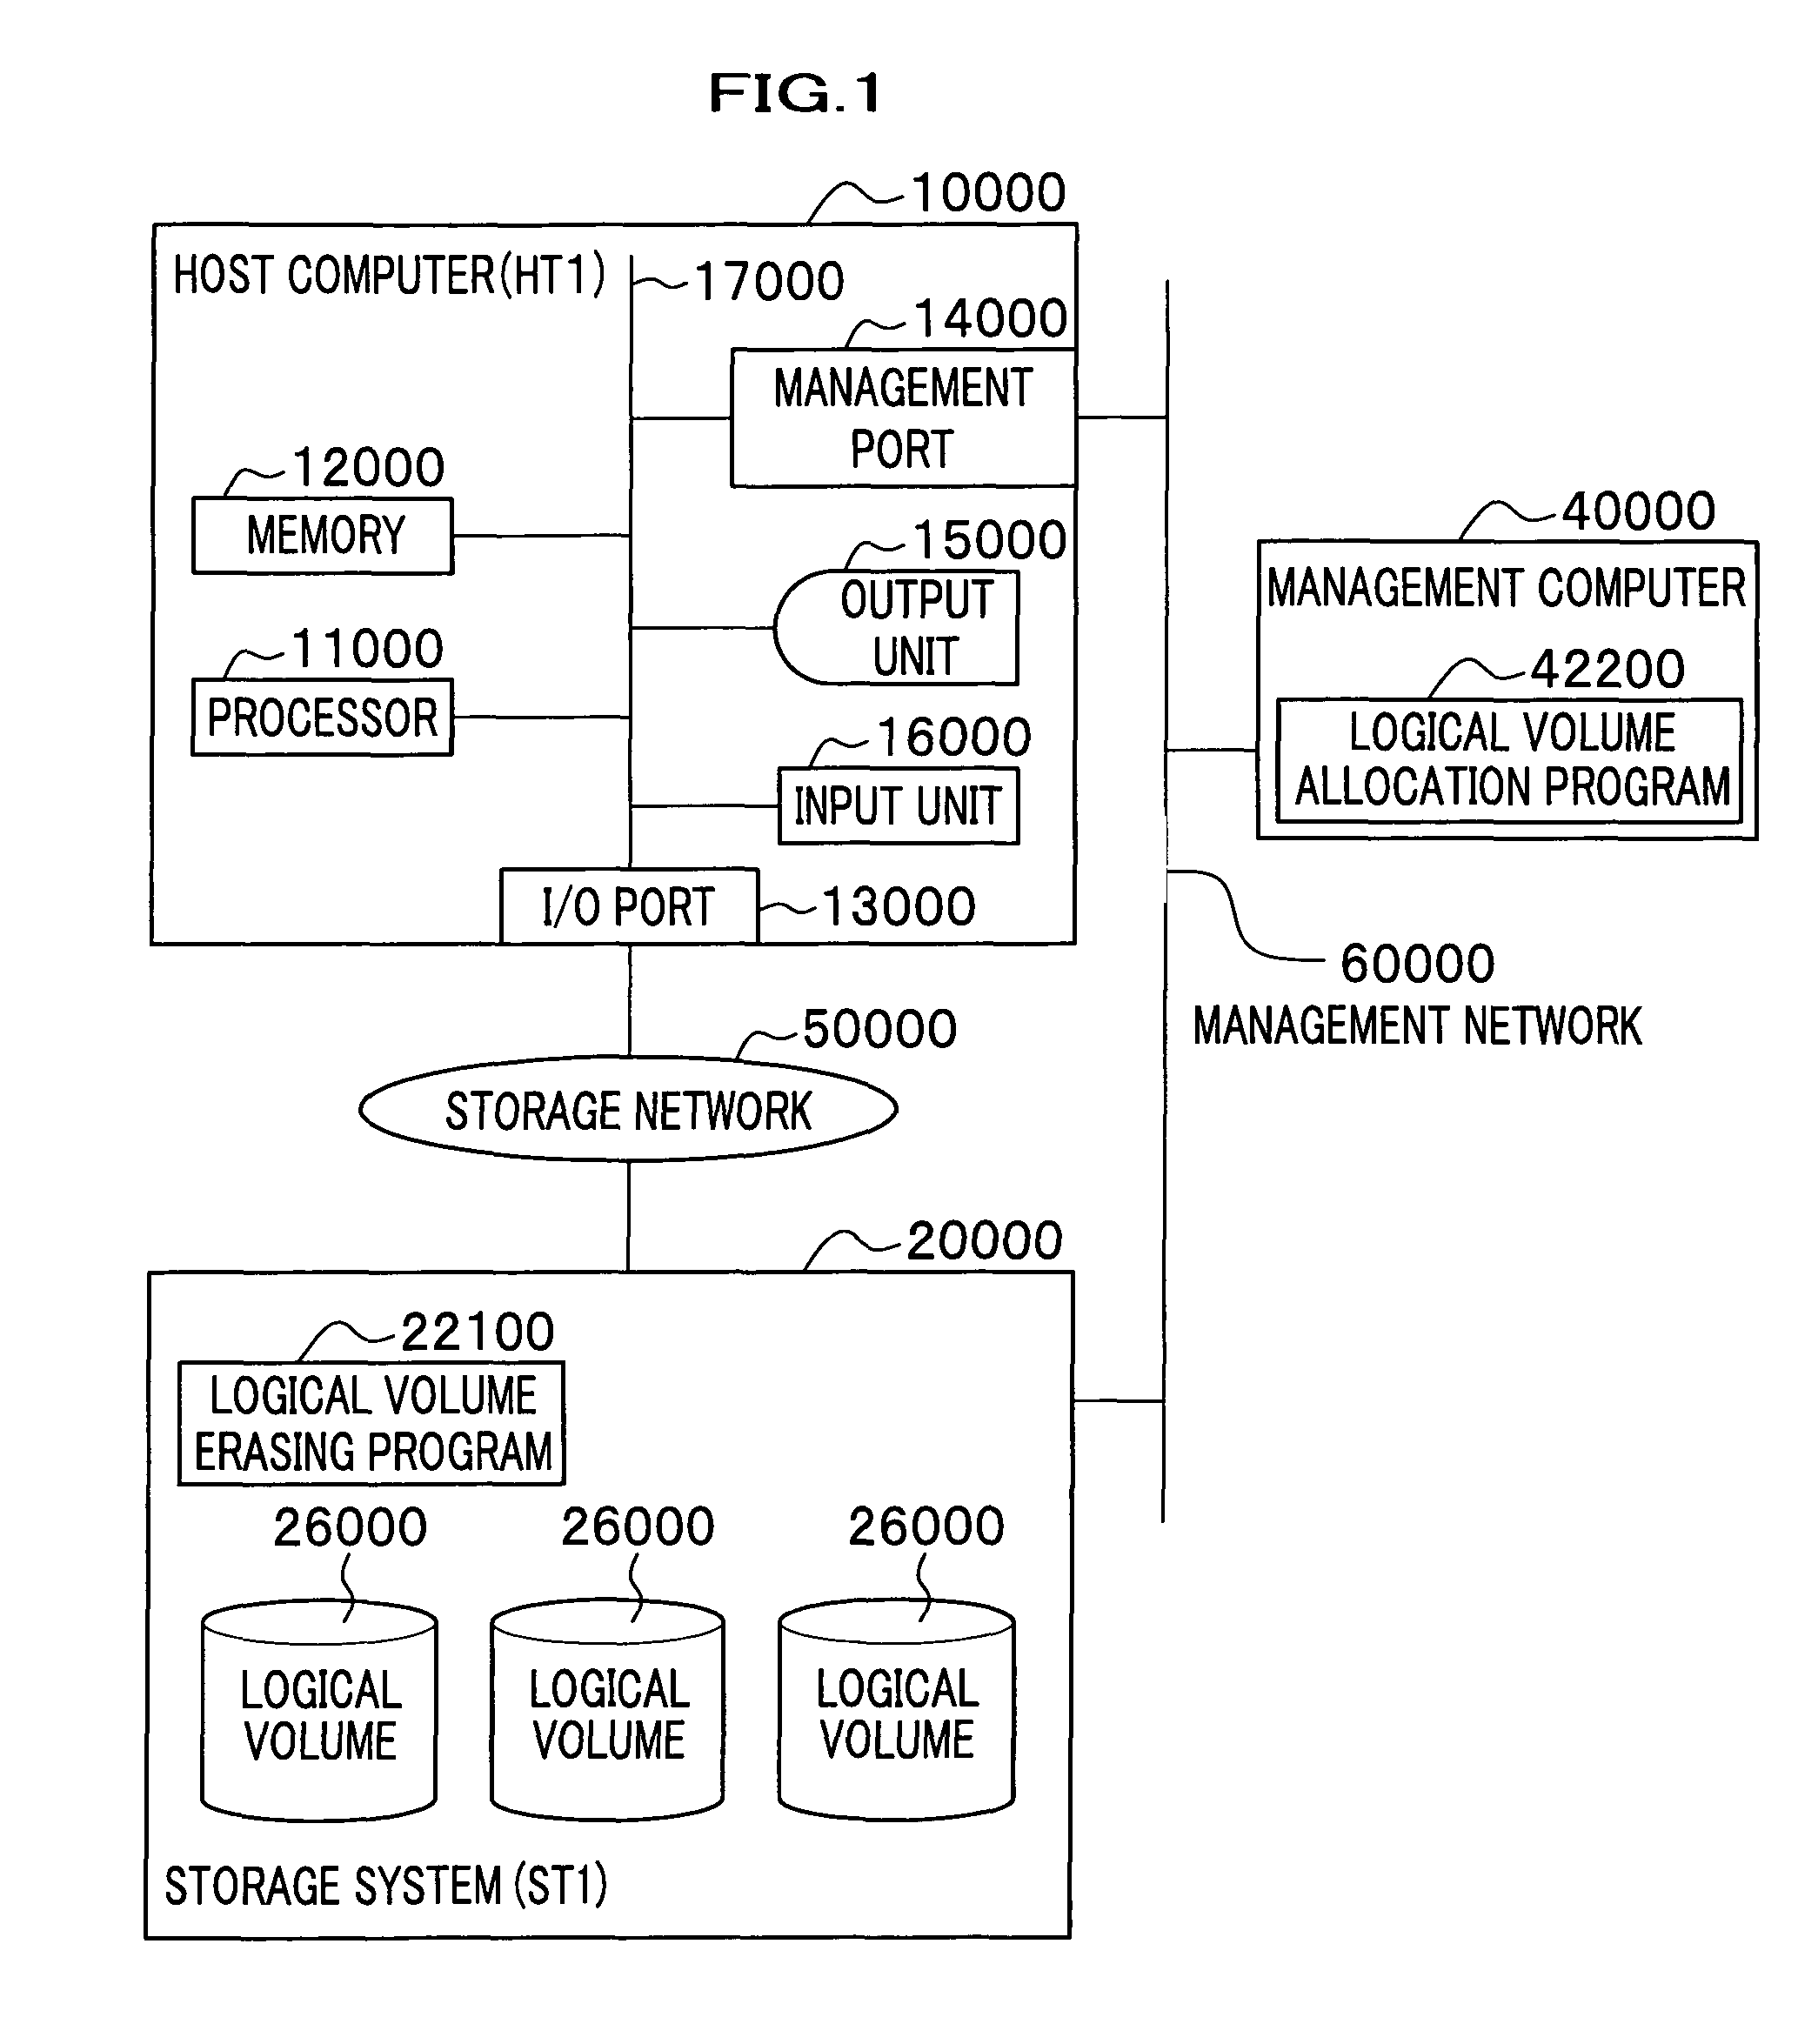 Allocation of logical volumes to flash memory drives